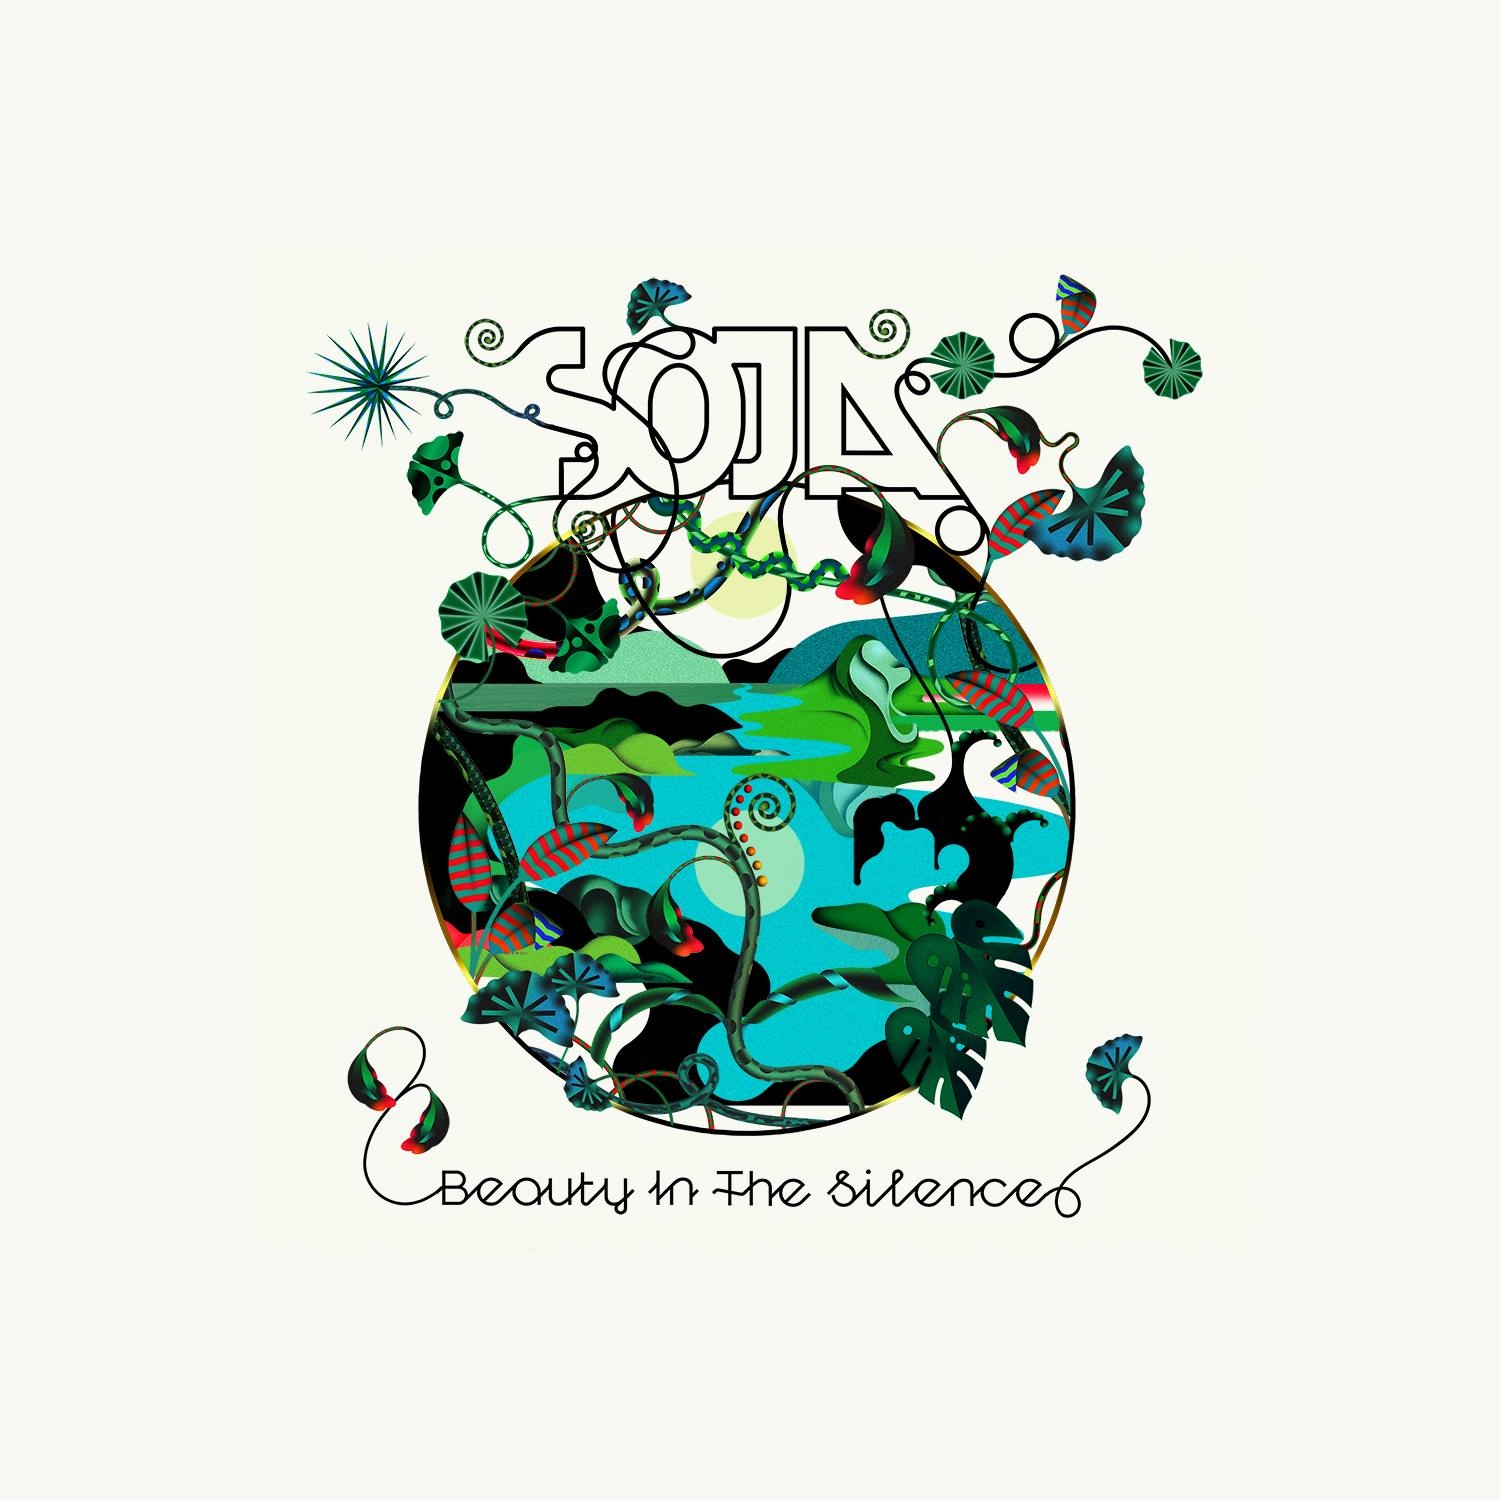 SOJA — Beauty in the silence